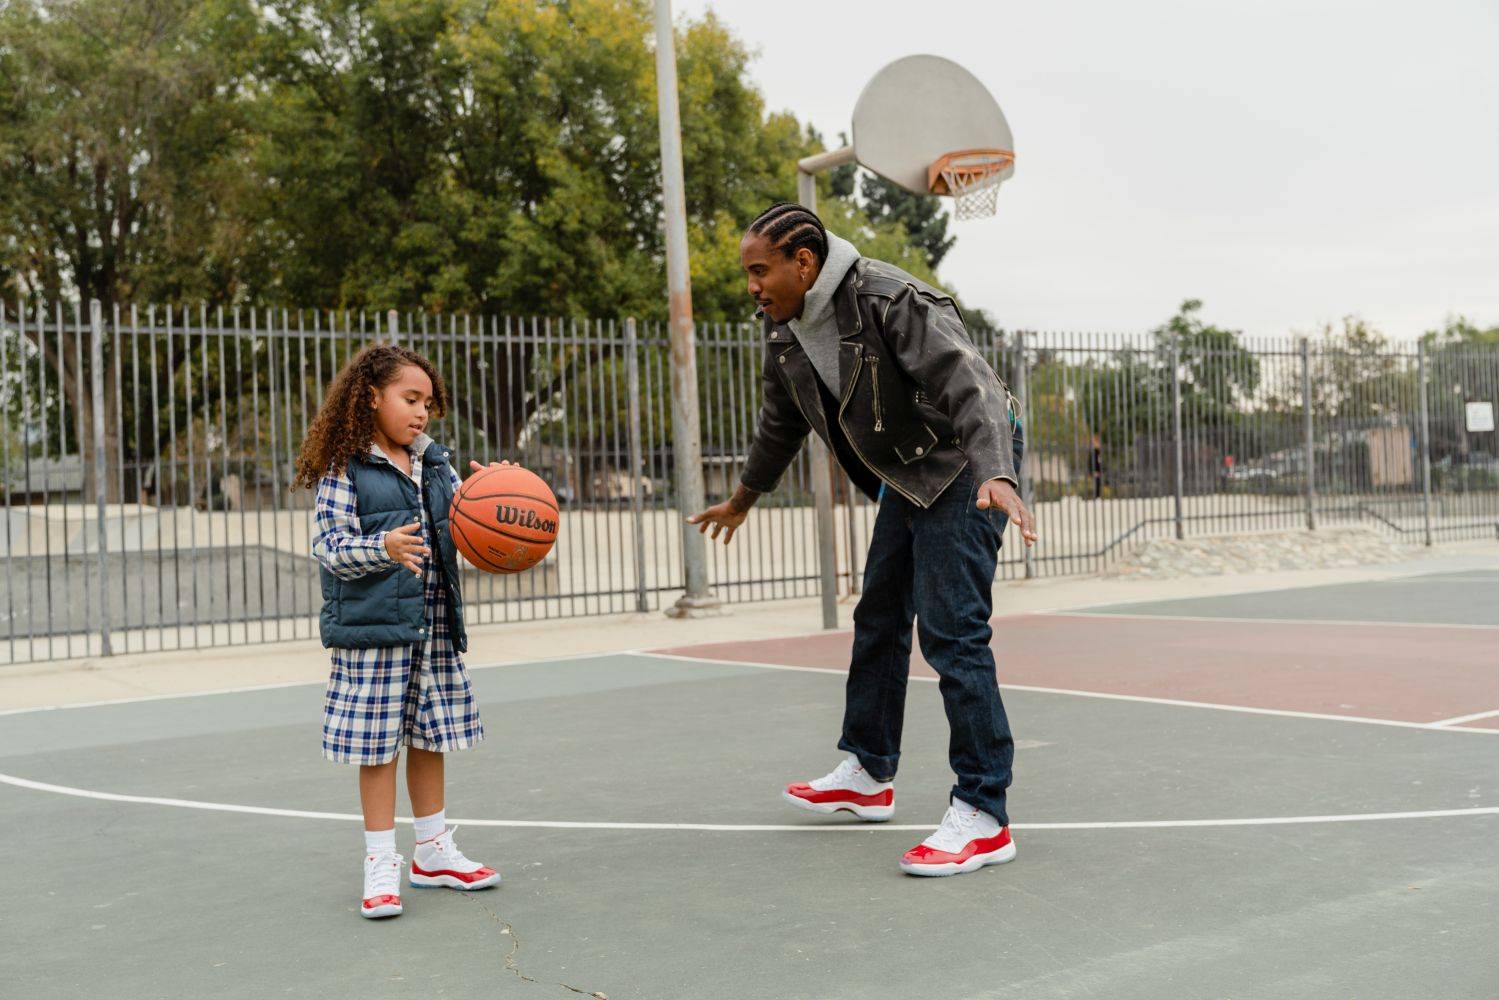 father and daughter playing basketball in aj11 retro cherry